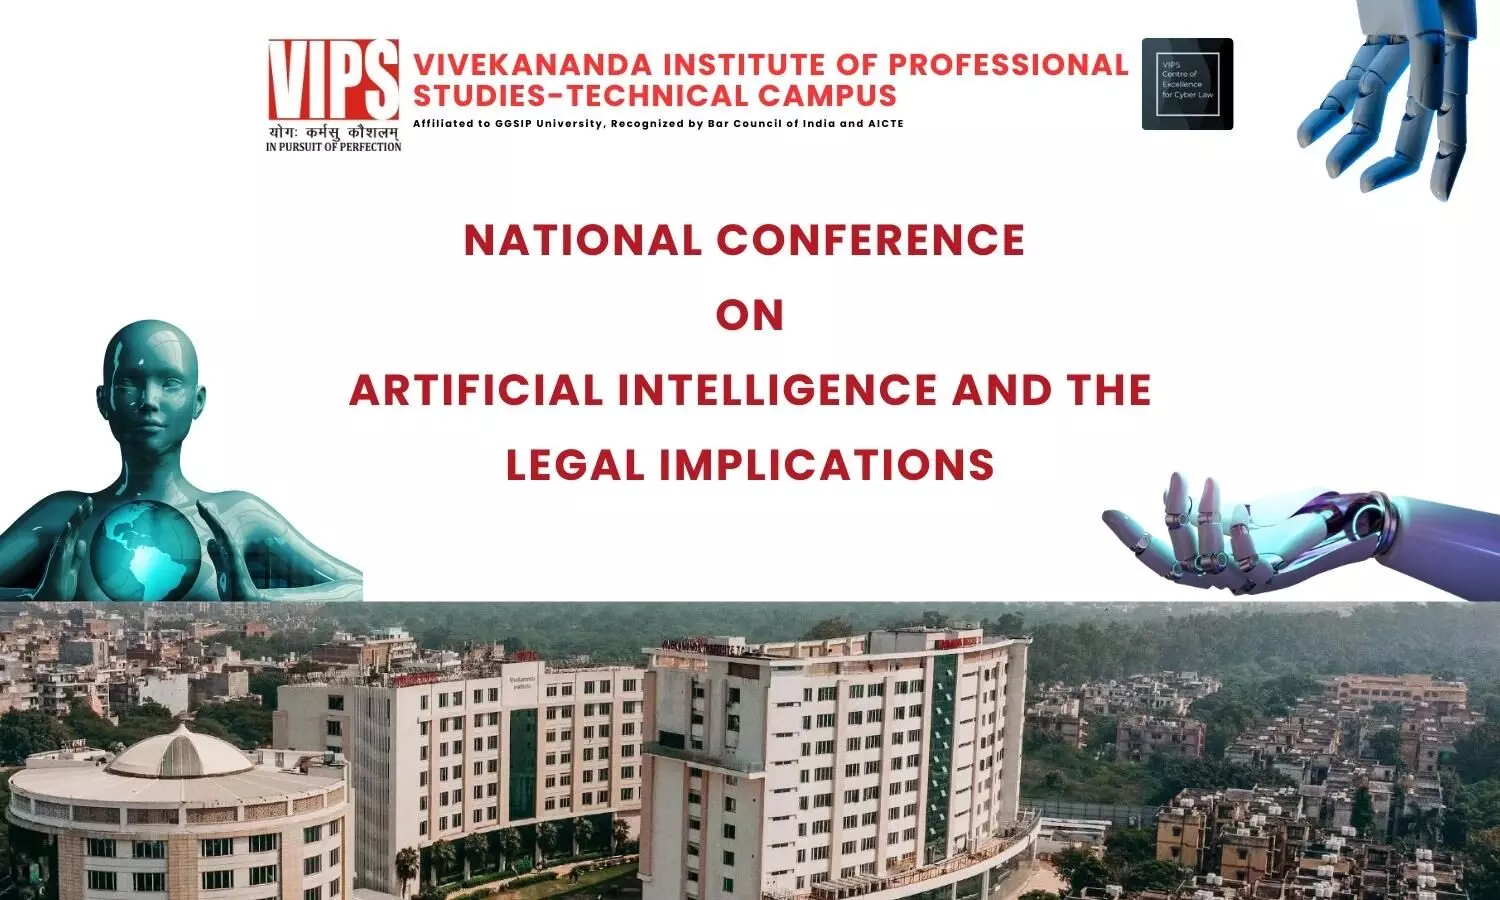 Call for Papers: VIPS National Conference on Artificial Intelligence and the Legal Implications